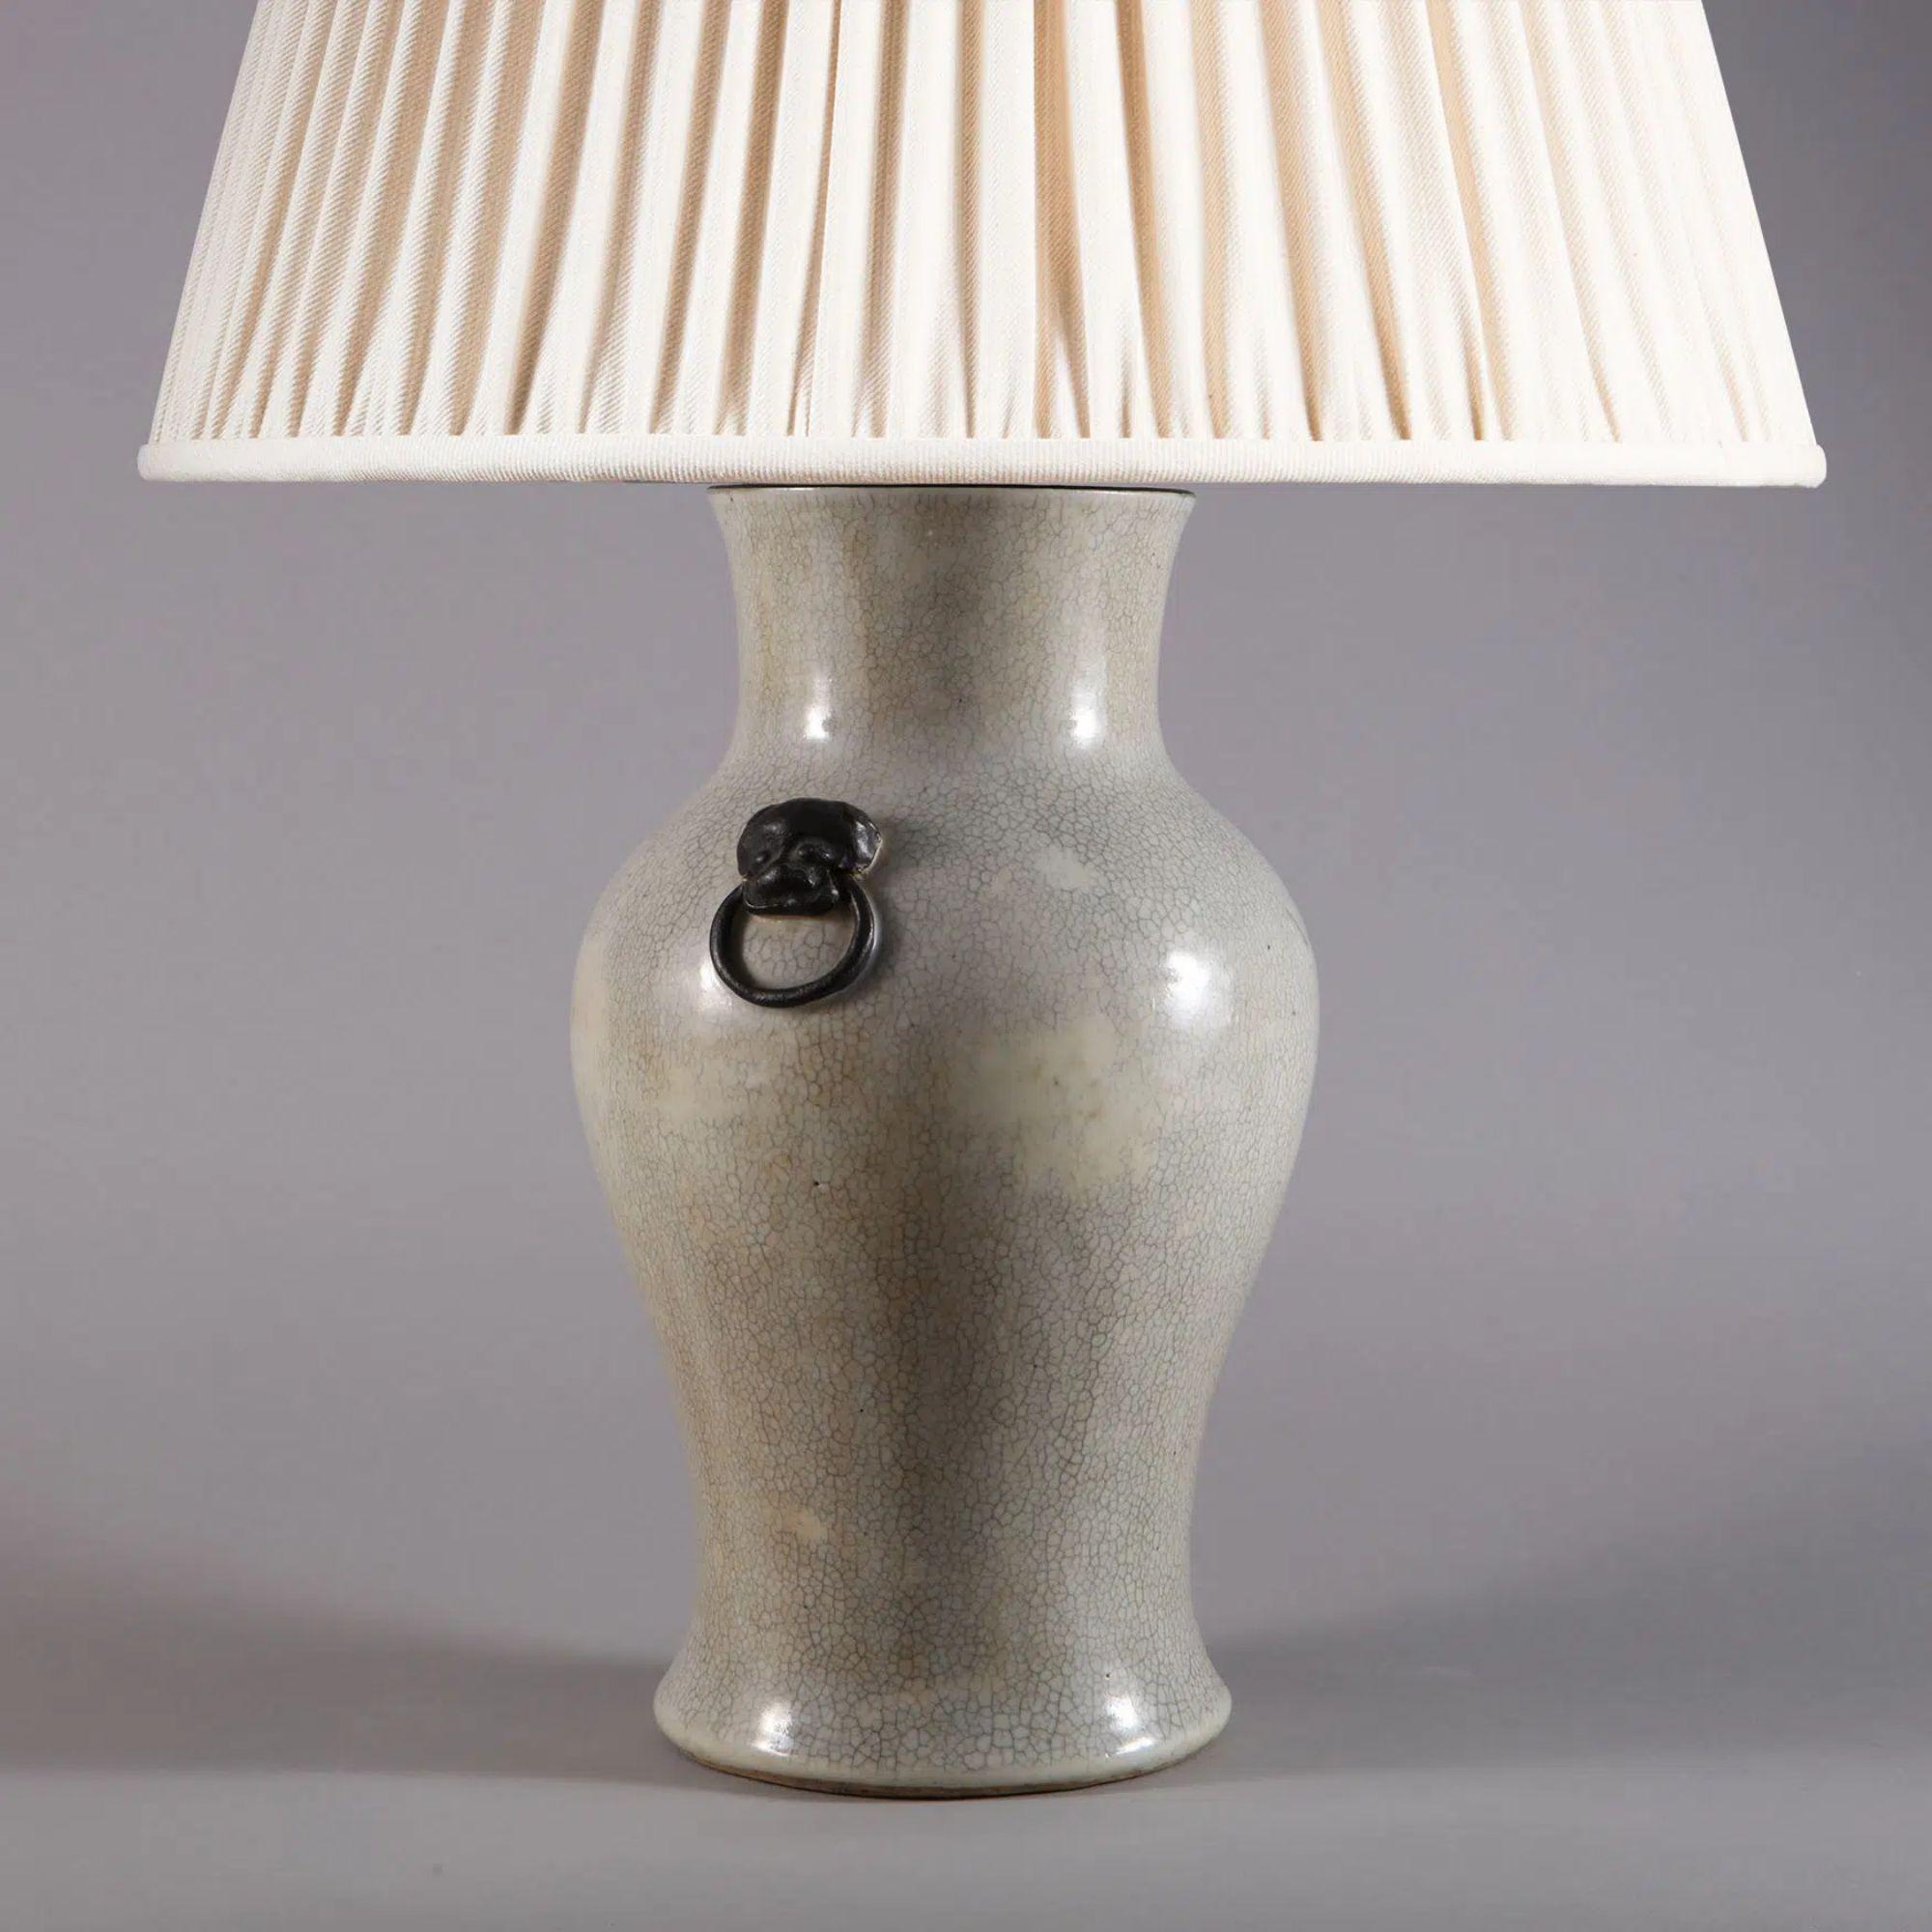 Chinese Export Chinese Crackle Glazed Vase Mounted as a Table Lamp, 19th Century For Sale